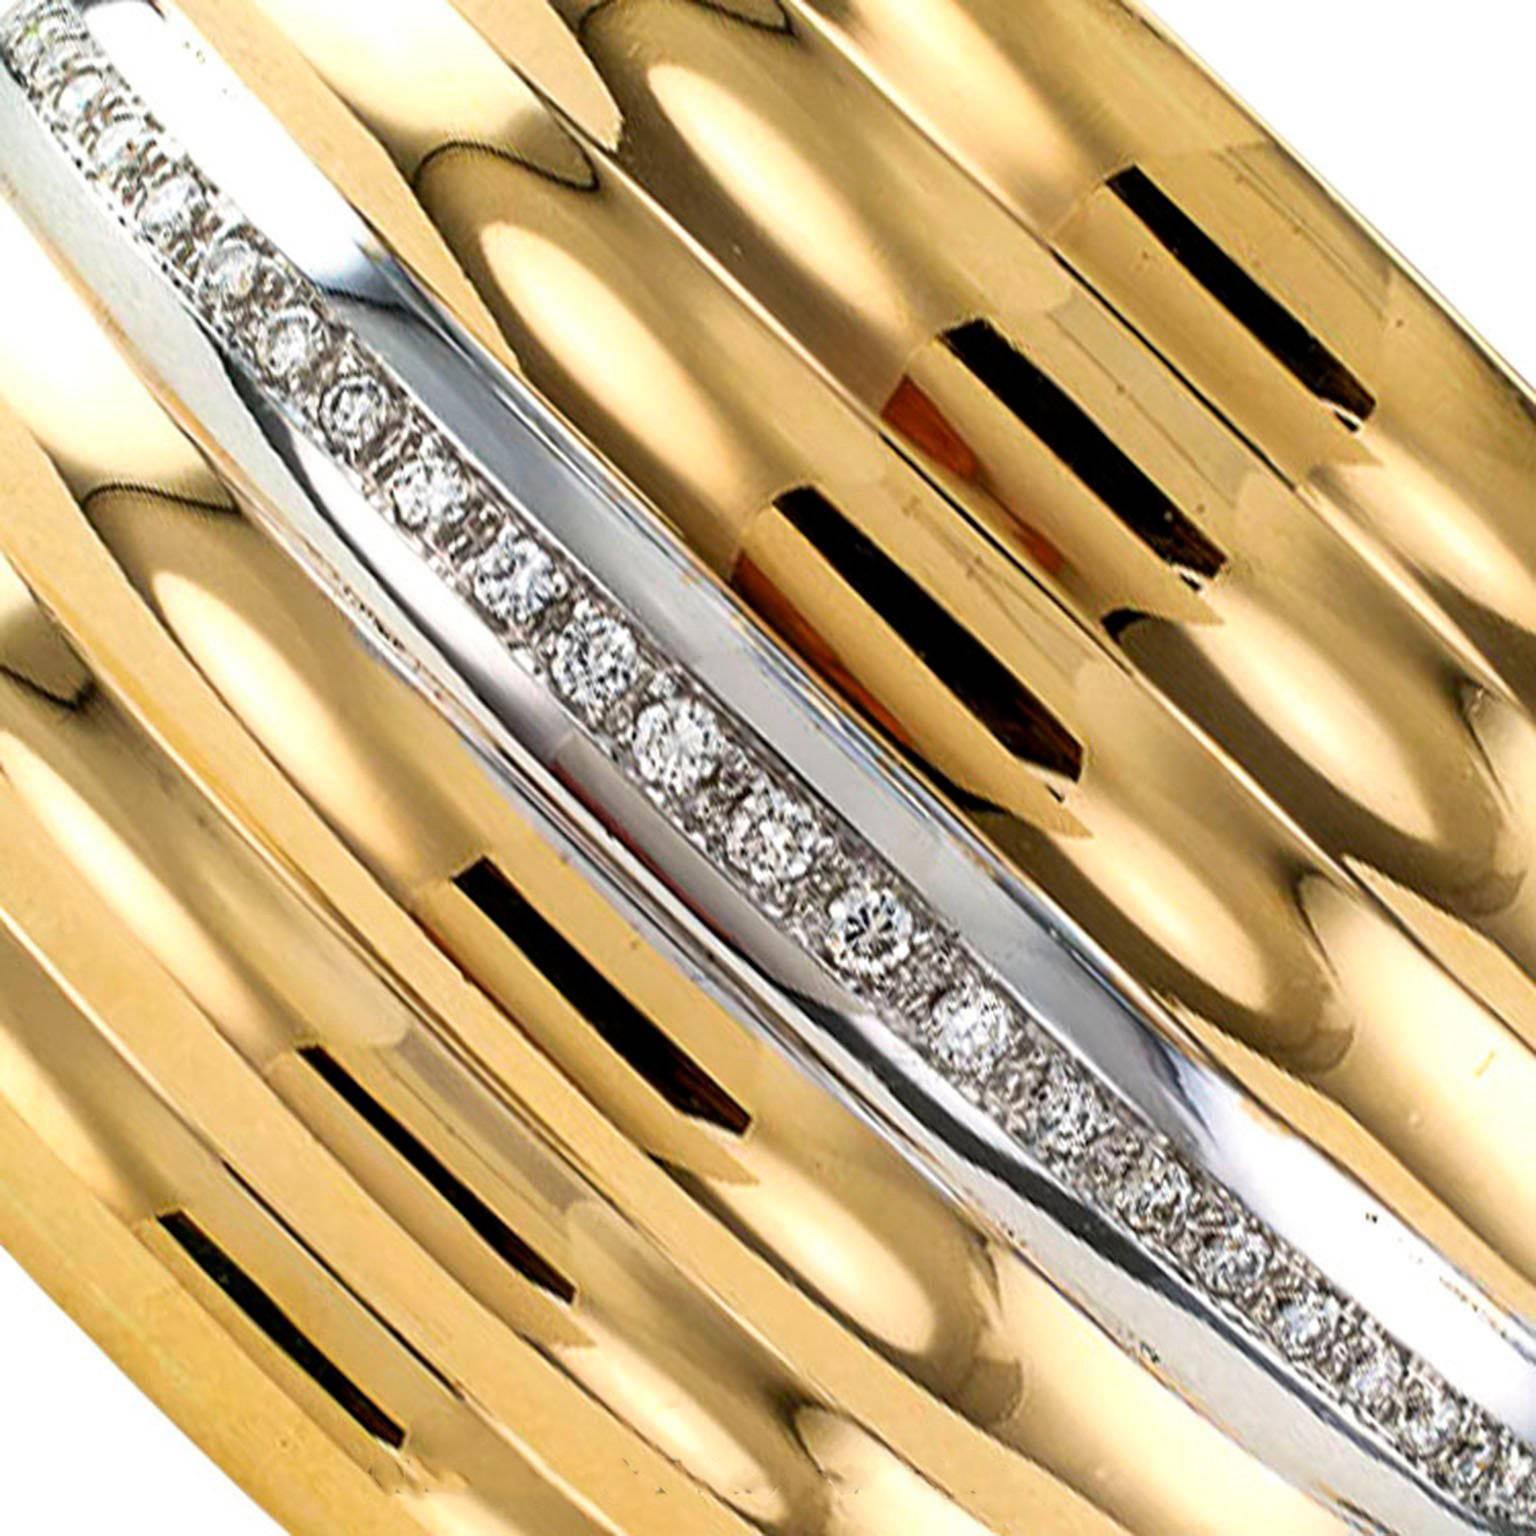 Contemporary Gold and Diamond Hinged Cuff Bracelet.

A wide two-tone 18-karat gold and diamond hinged cuff bracelet designed to create the illusion of seven rippling bands of brightly polished gold, the central band set with a course of twenty-seven